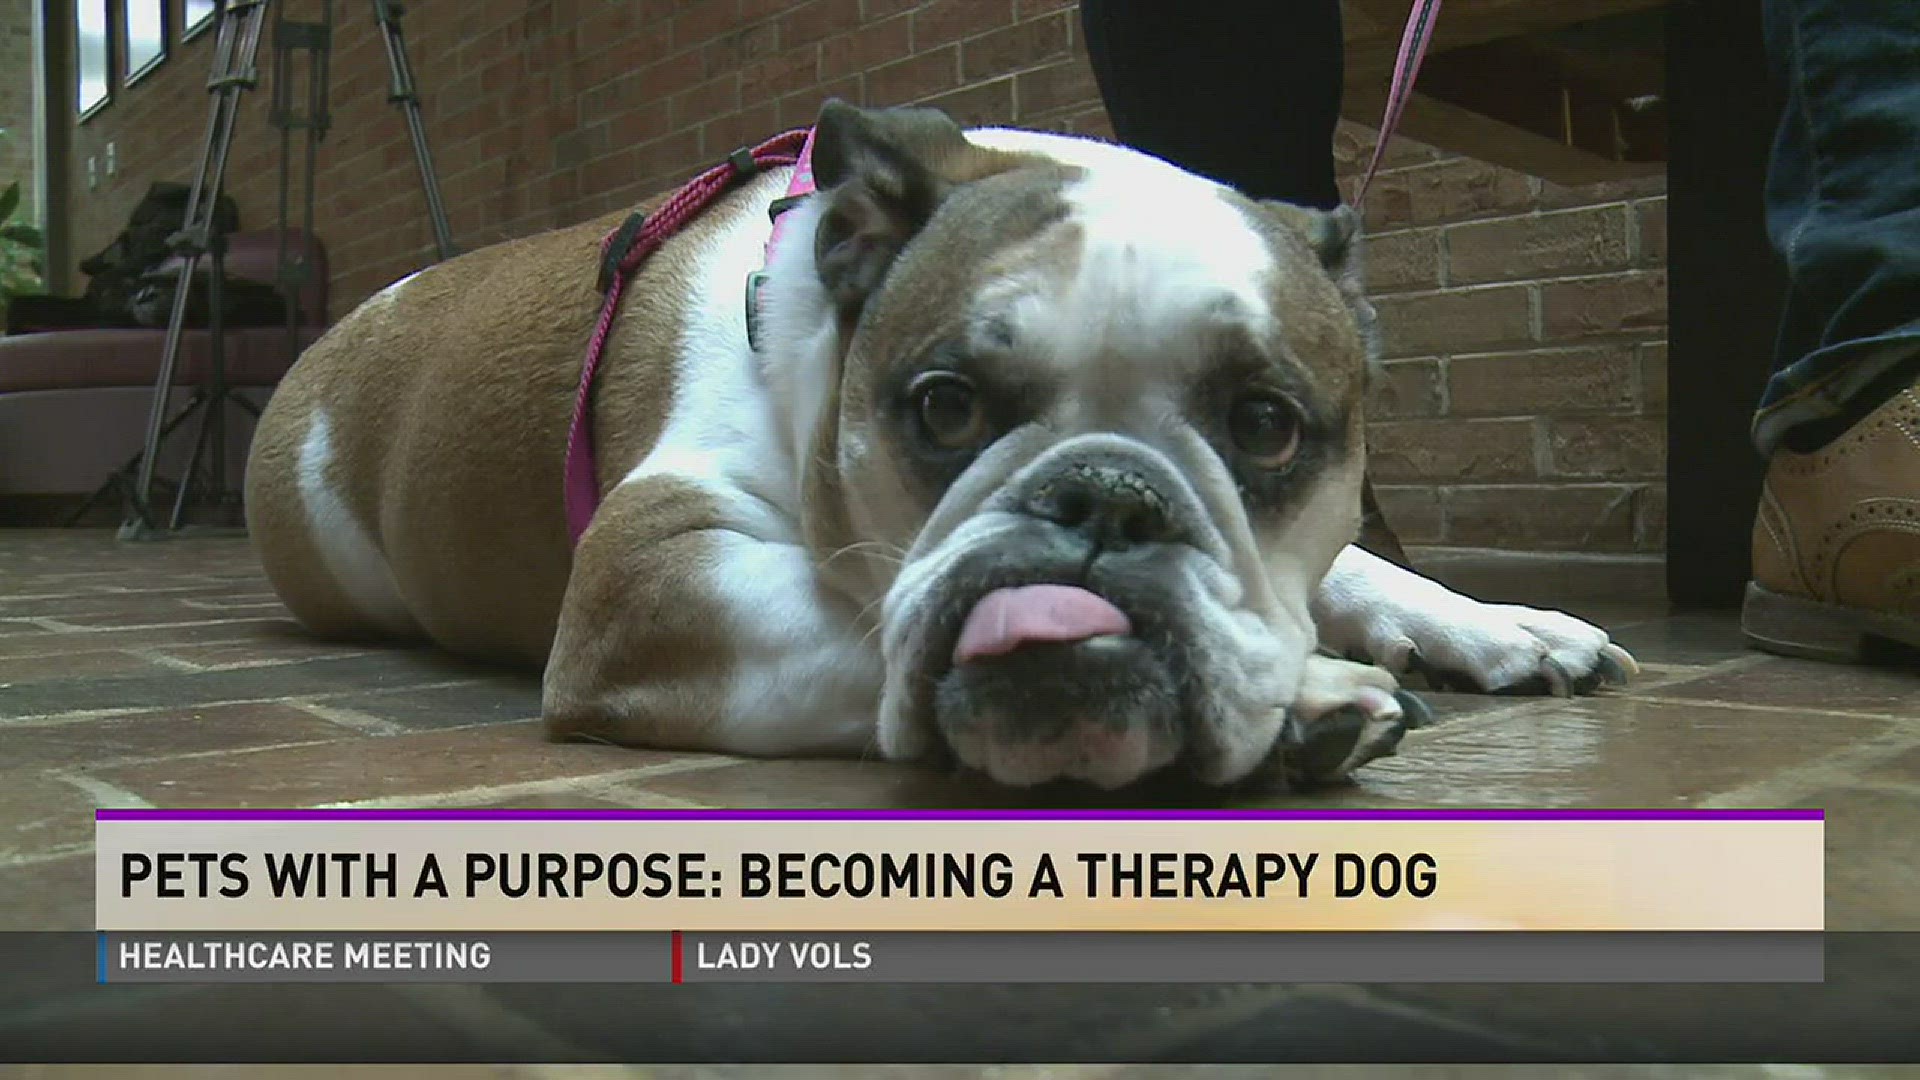 Pets with a purpose: Becoming a therapy dog